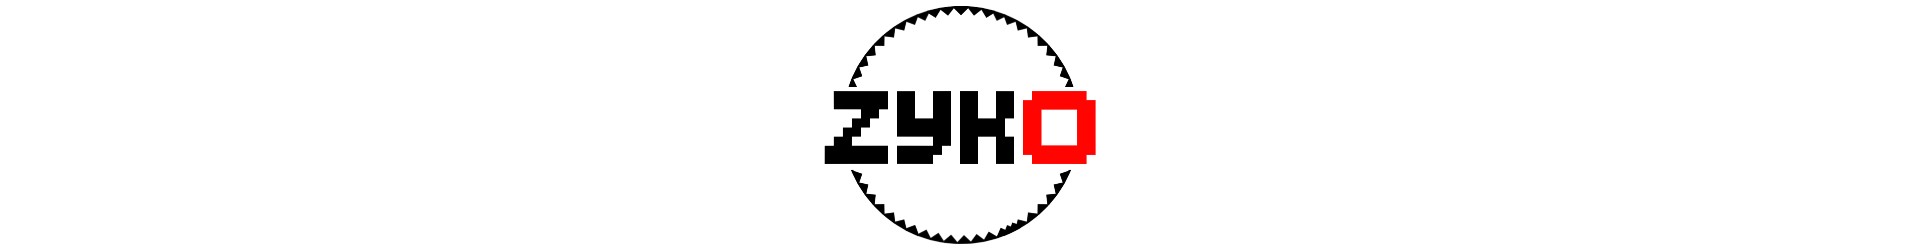 ZYKO